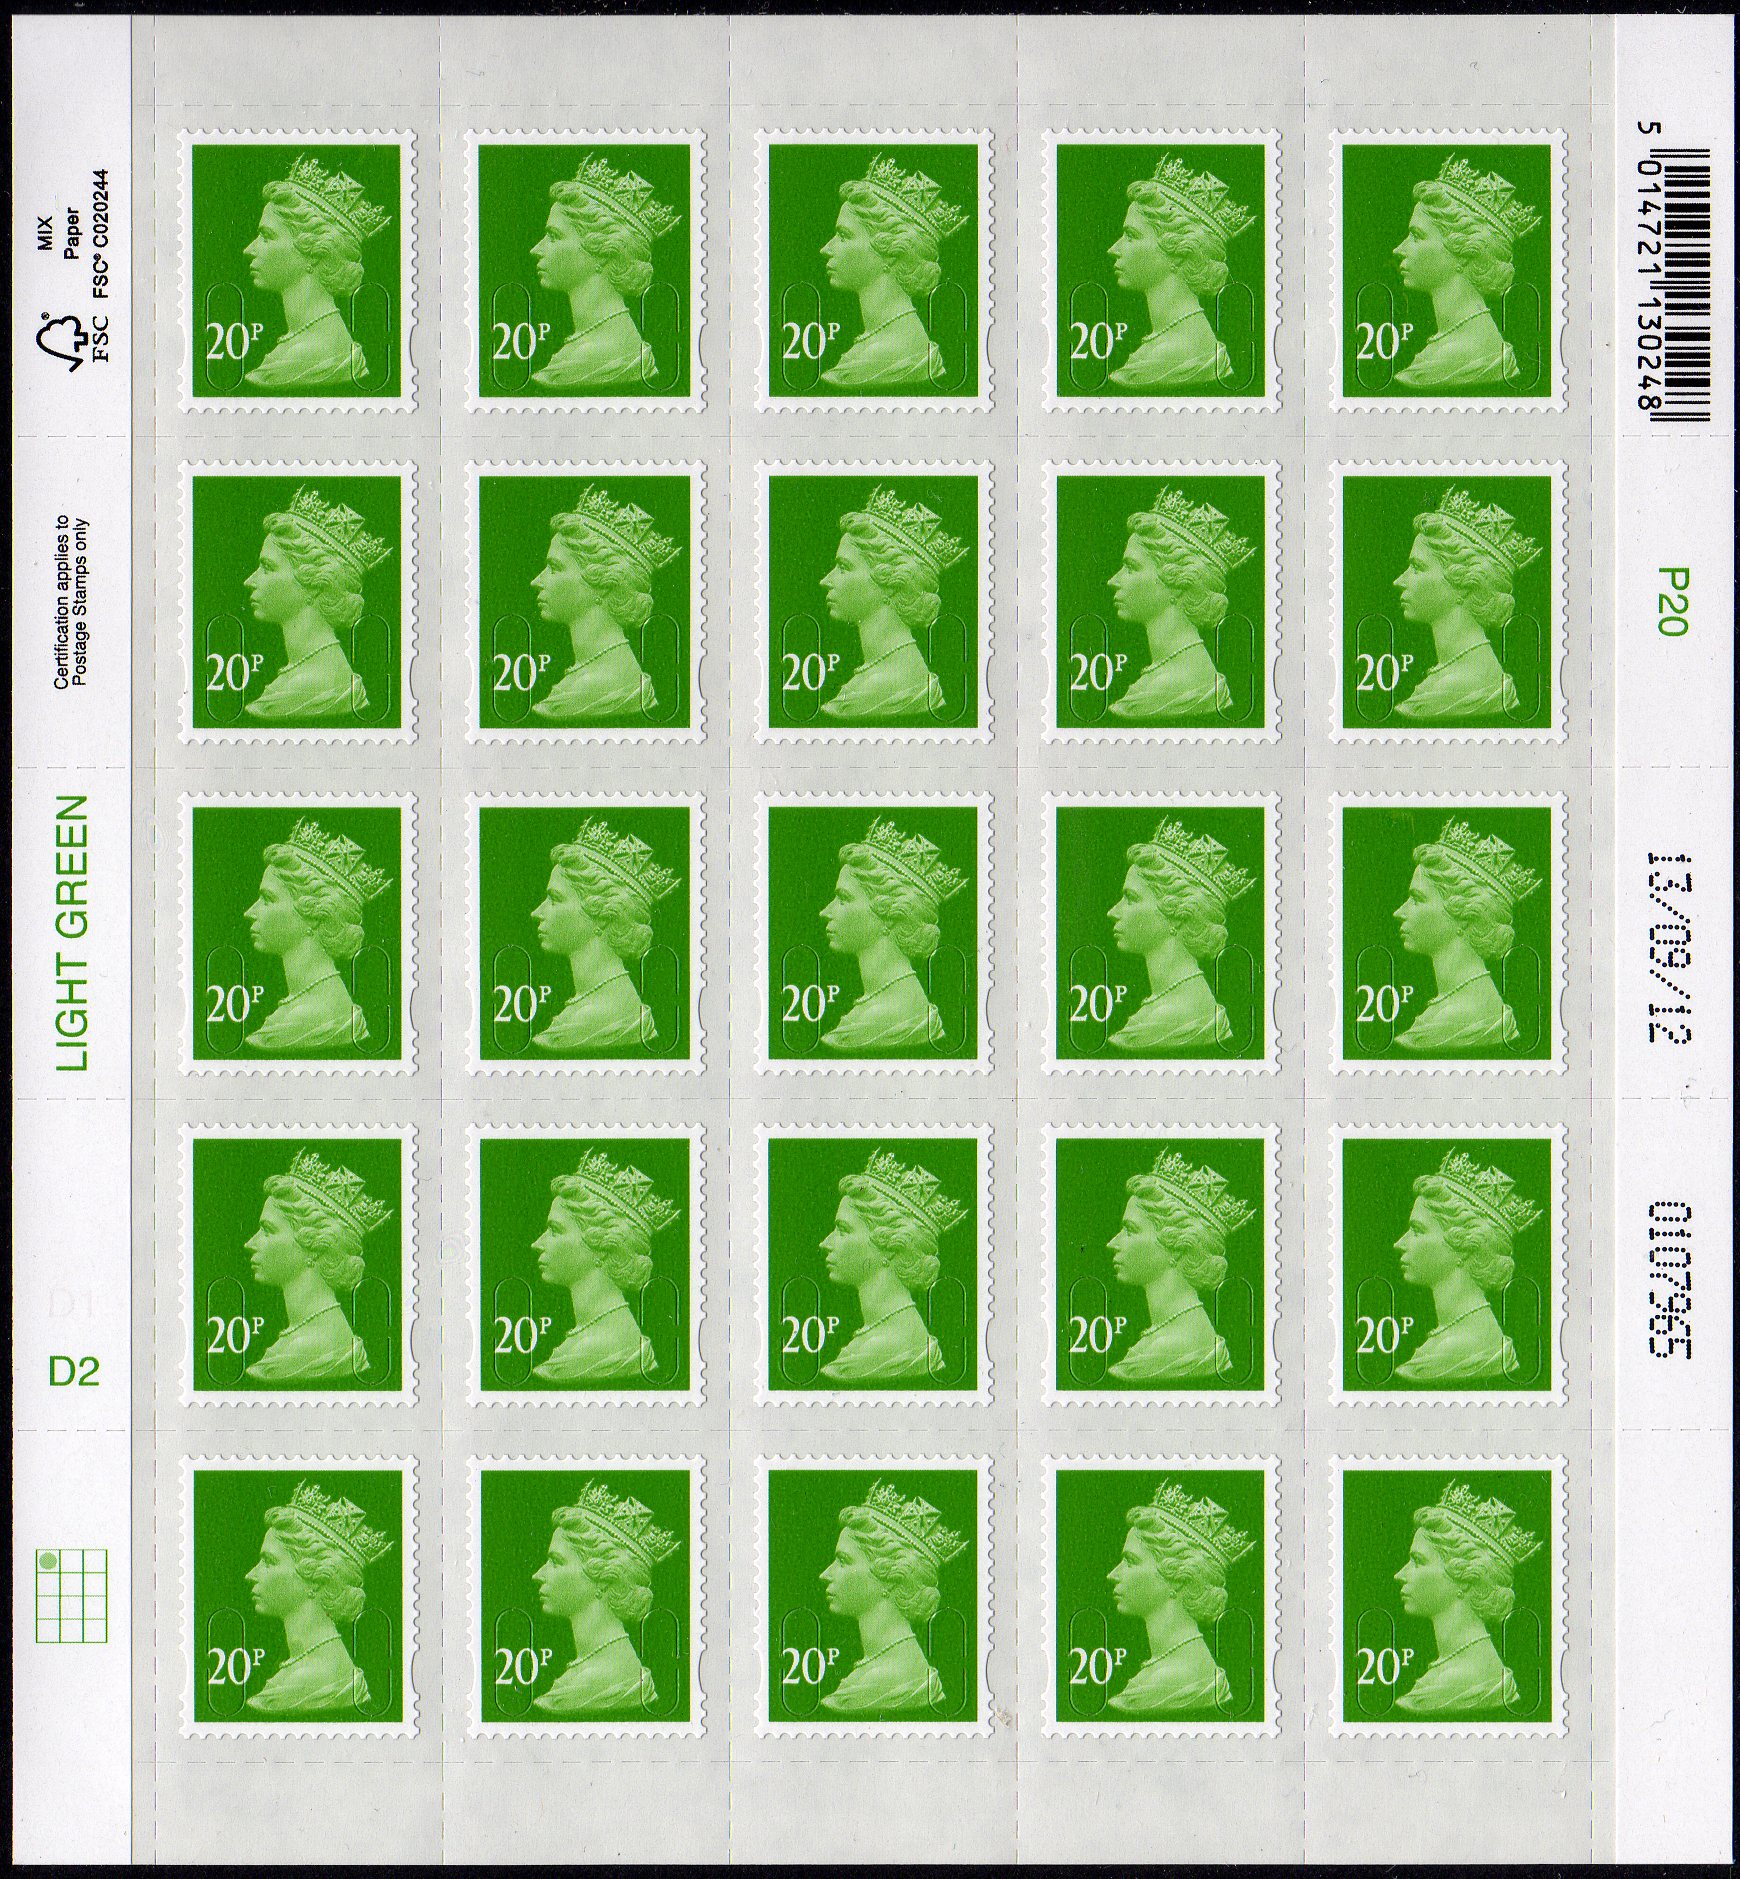 Sheet of 20p green stamps 2013.